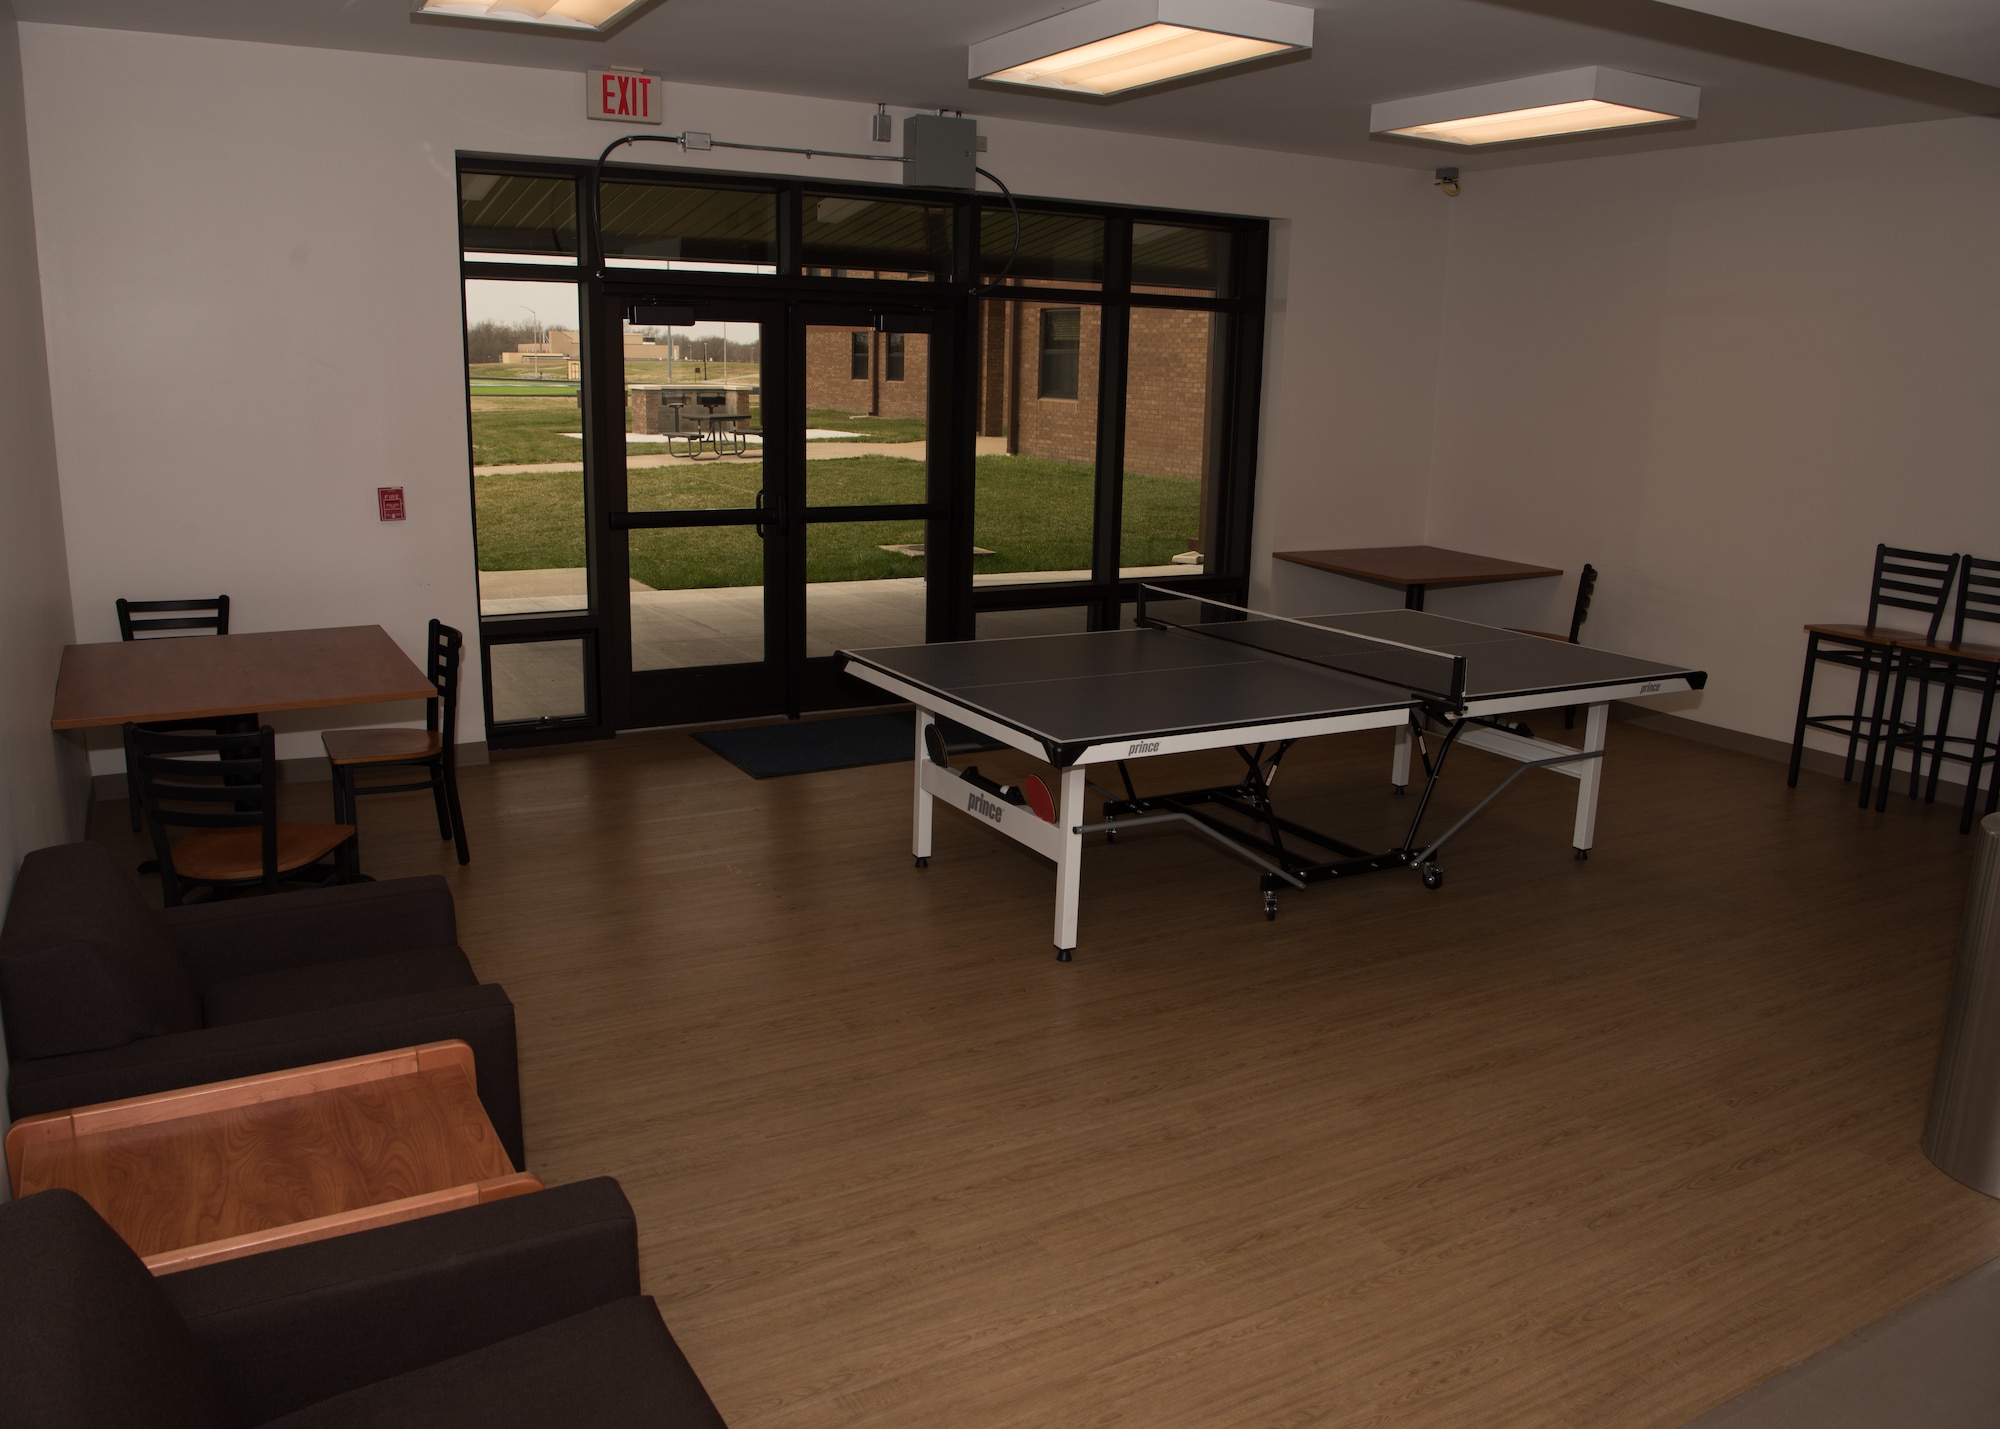 The dayroom in Endeavour Hall contains a ping pong table along with seating and vending machines for Airmen to use.